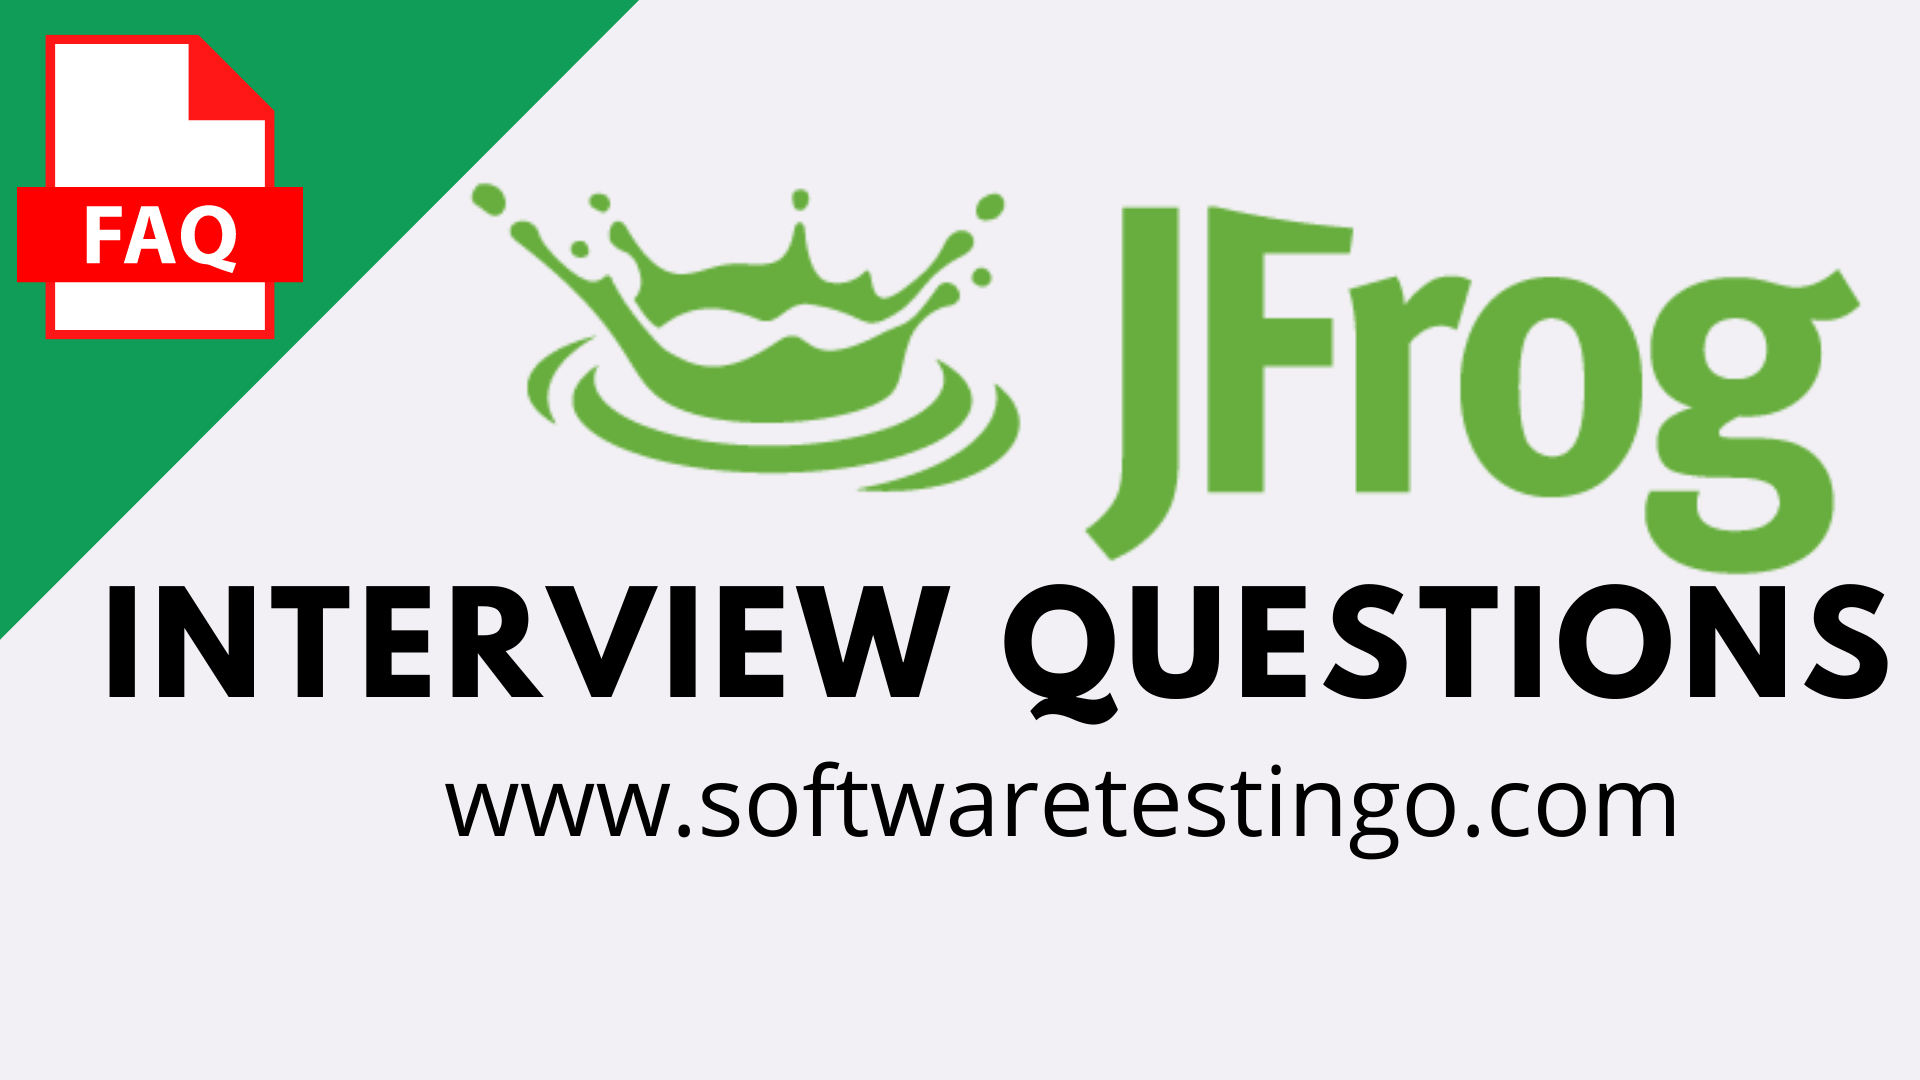 JFrog Interview Questions